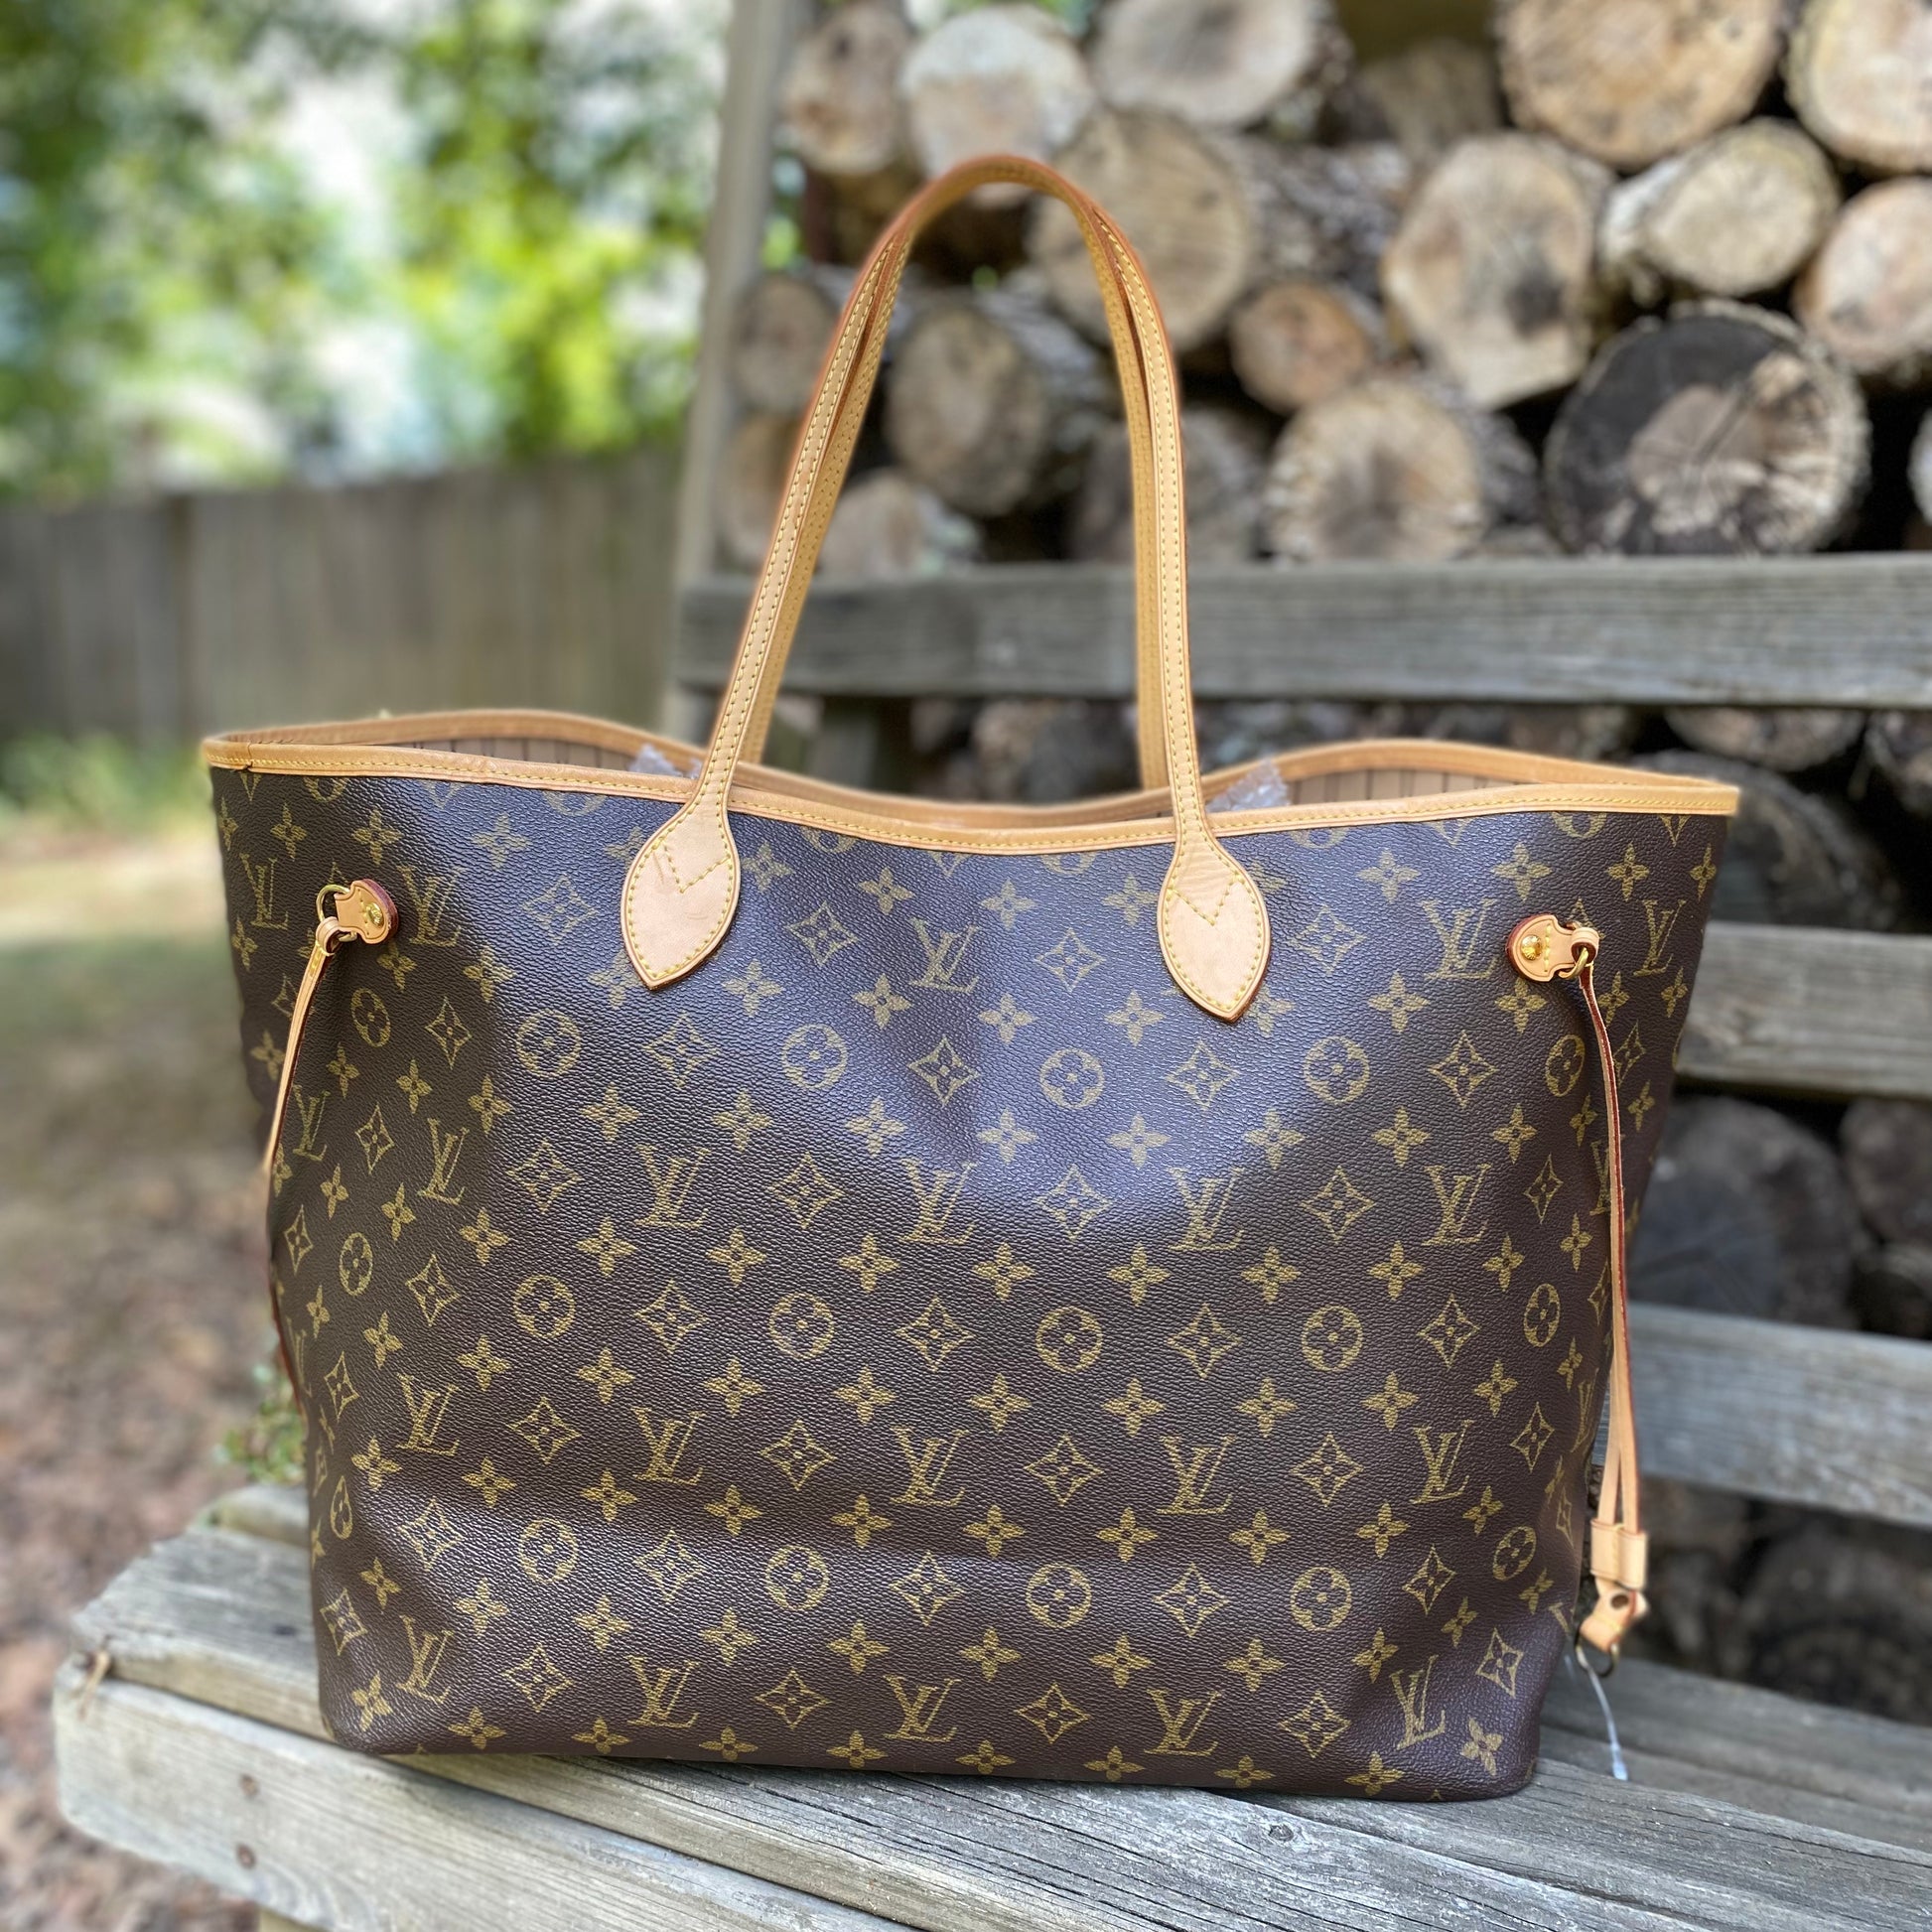 Available $ 1699 Free standard shipping USA Authentic Neverfull GM